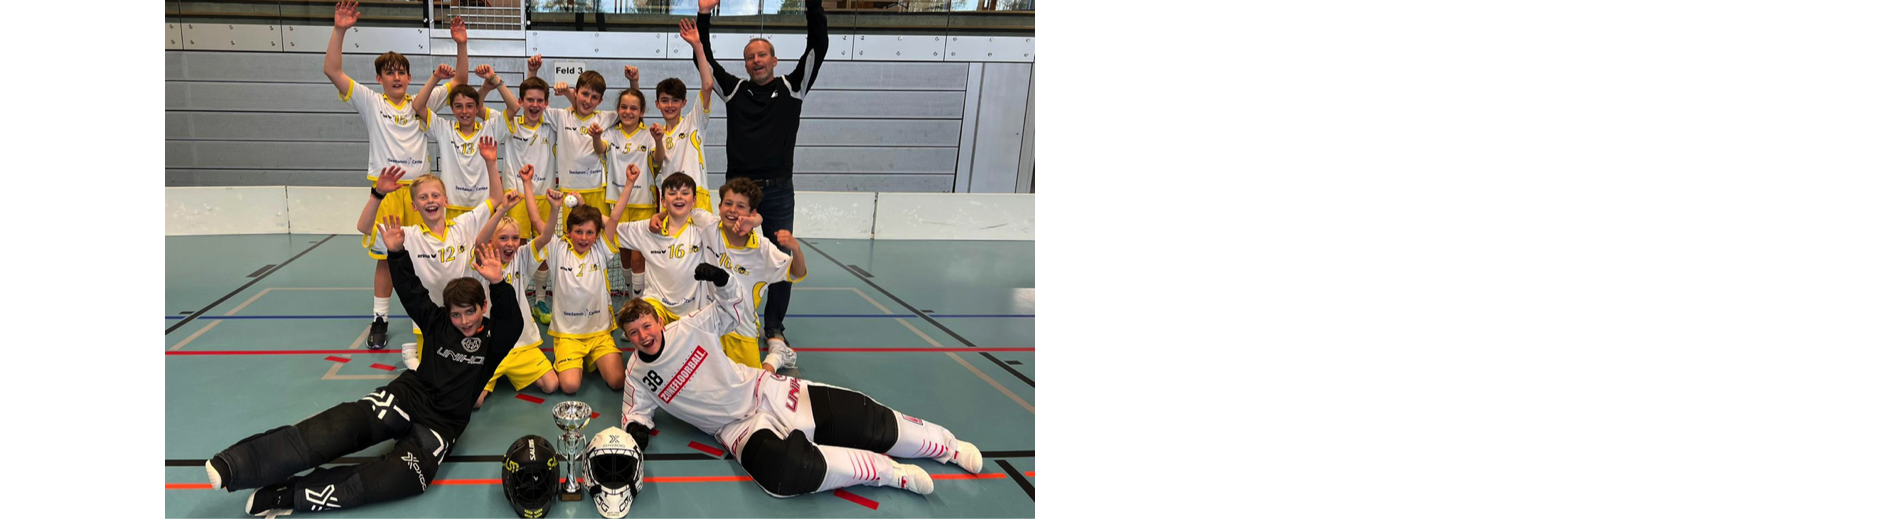 Obersee United I erfolgreich am D-Masters – Vizemeister!